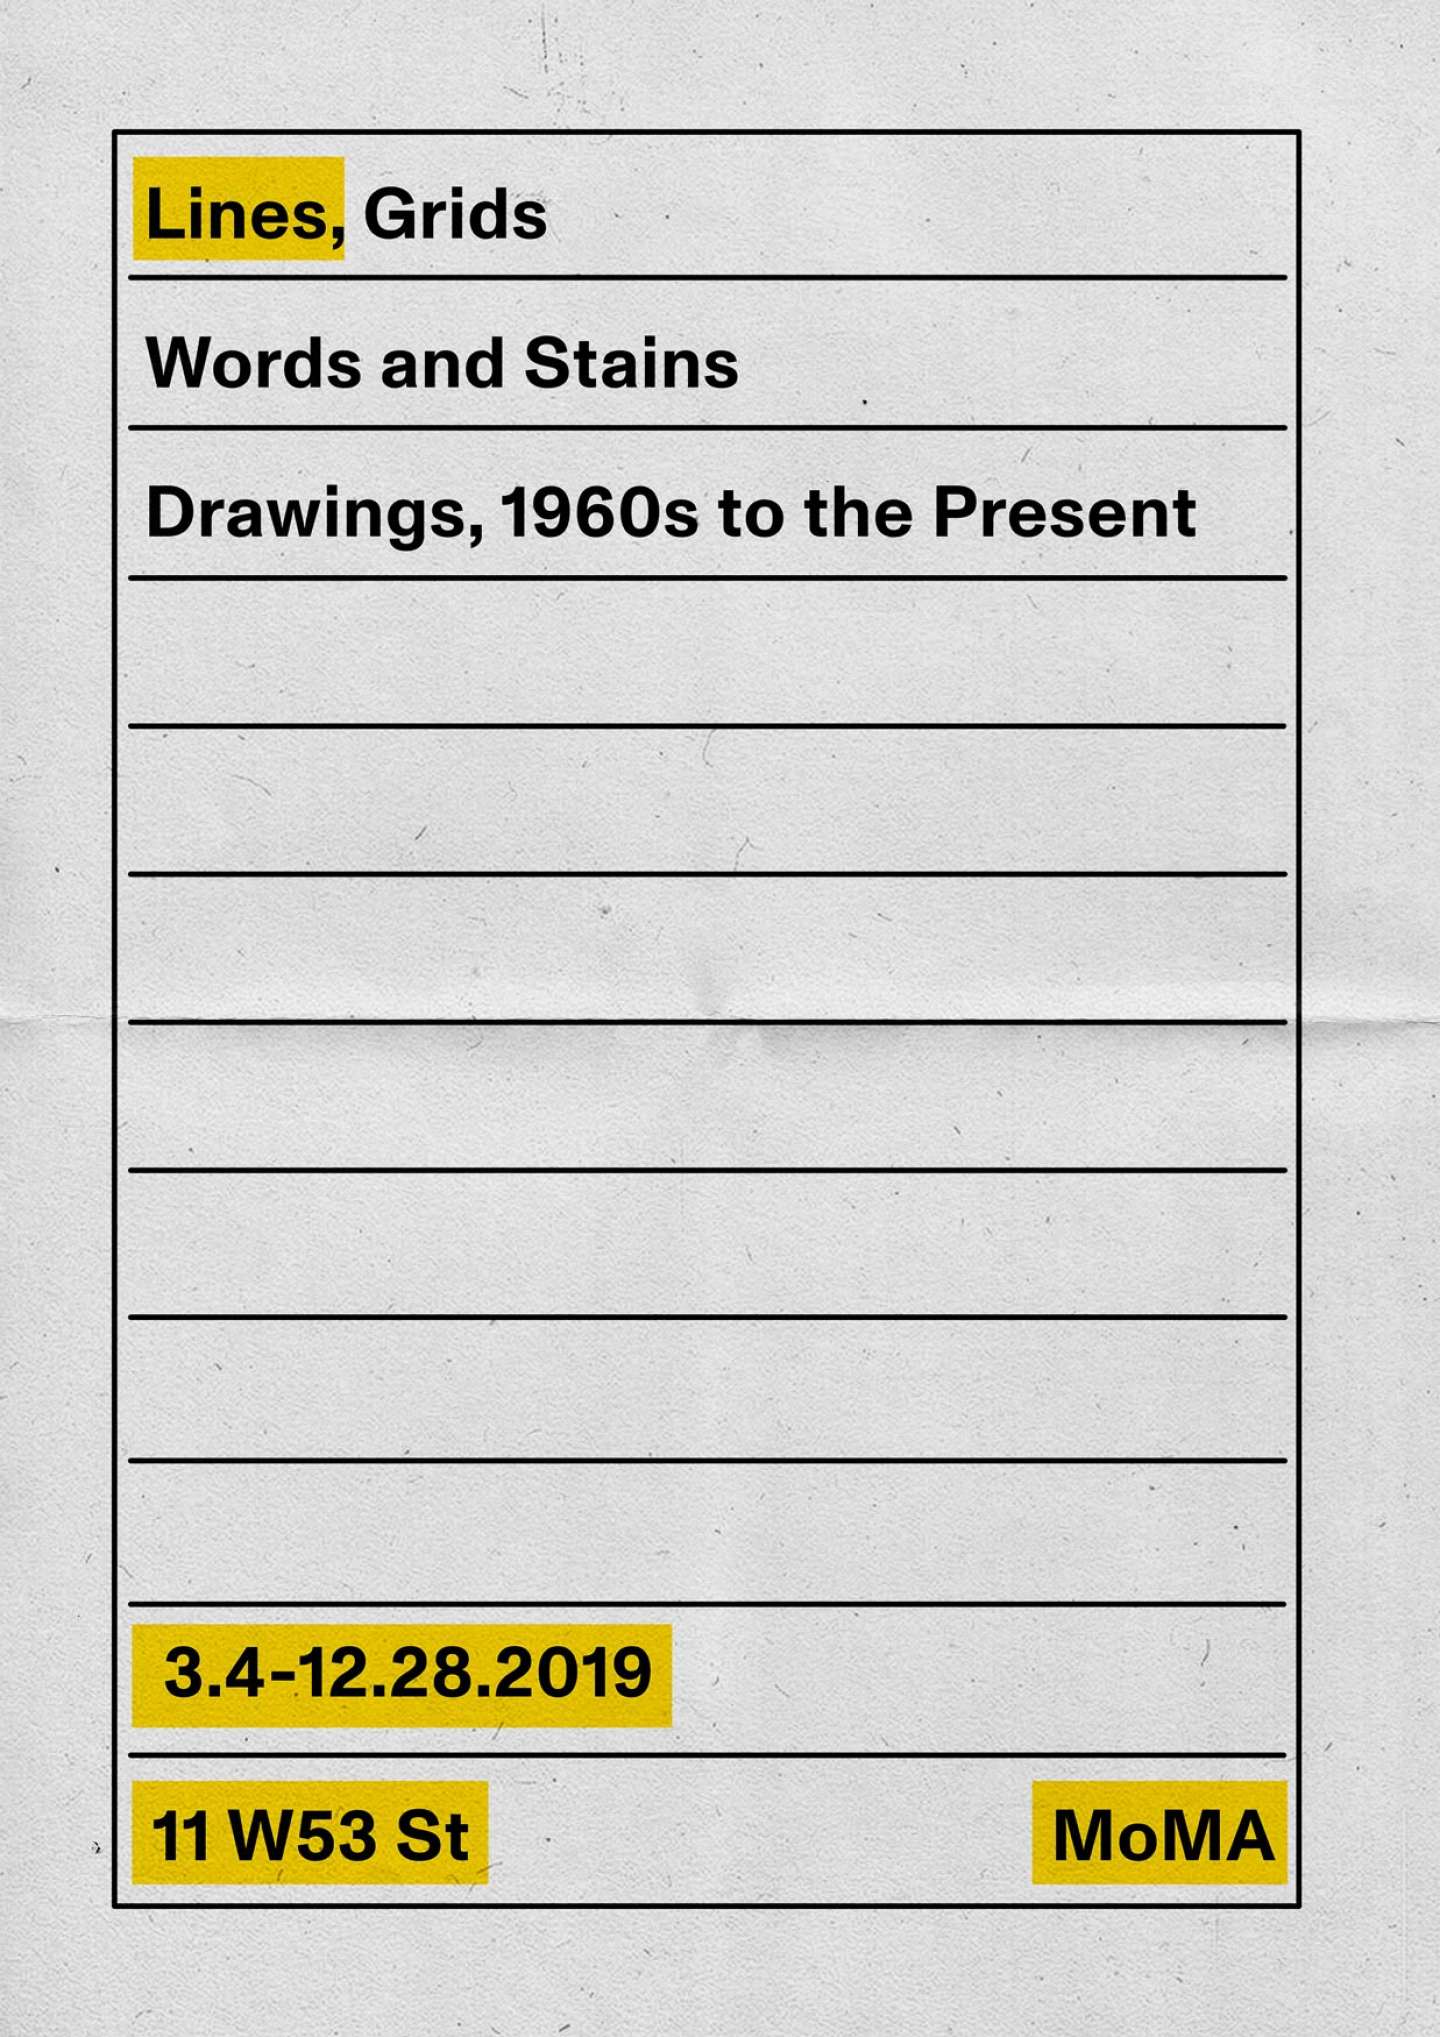 MoMA: Lines, Grids, Words & Stains